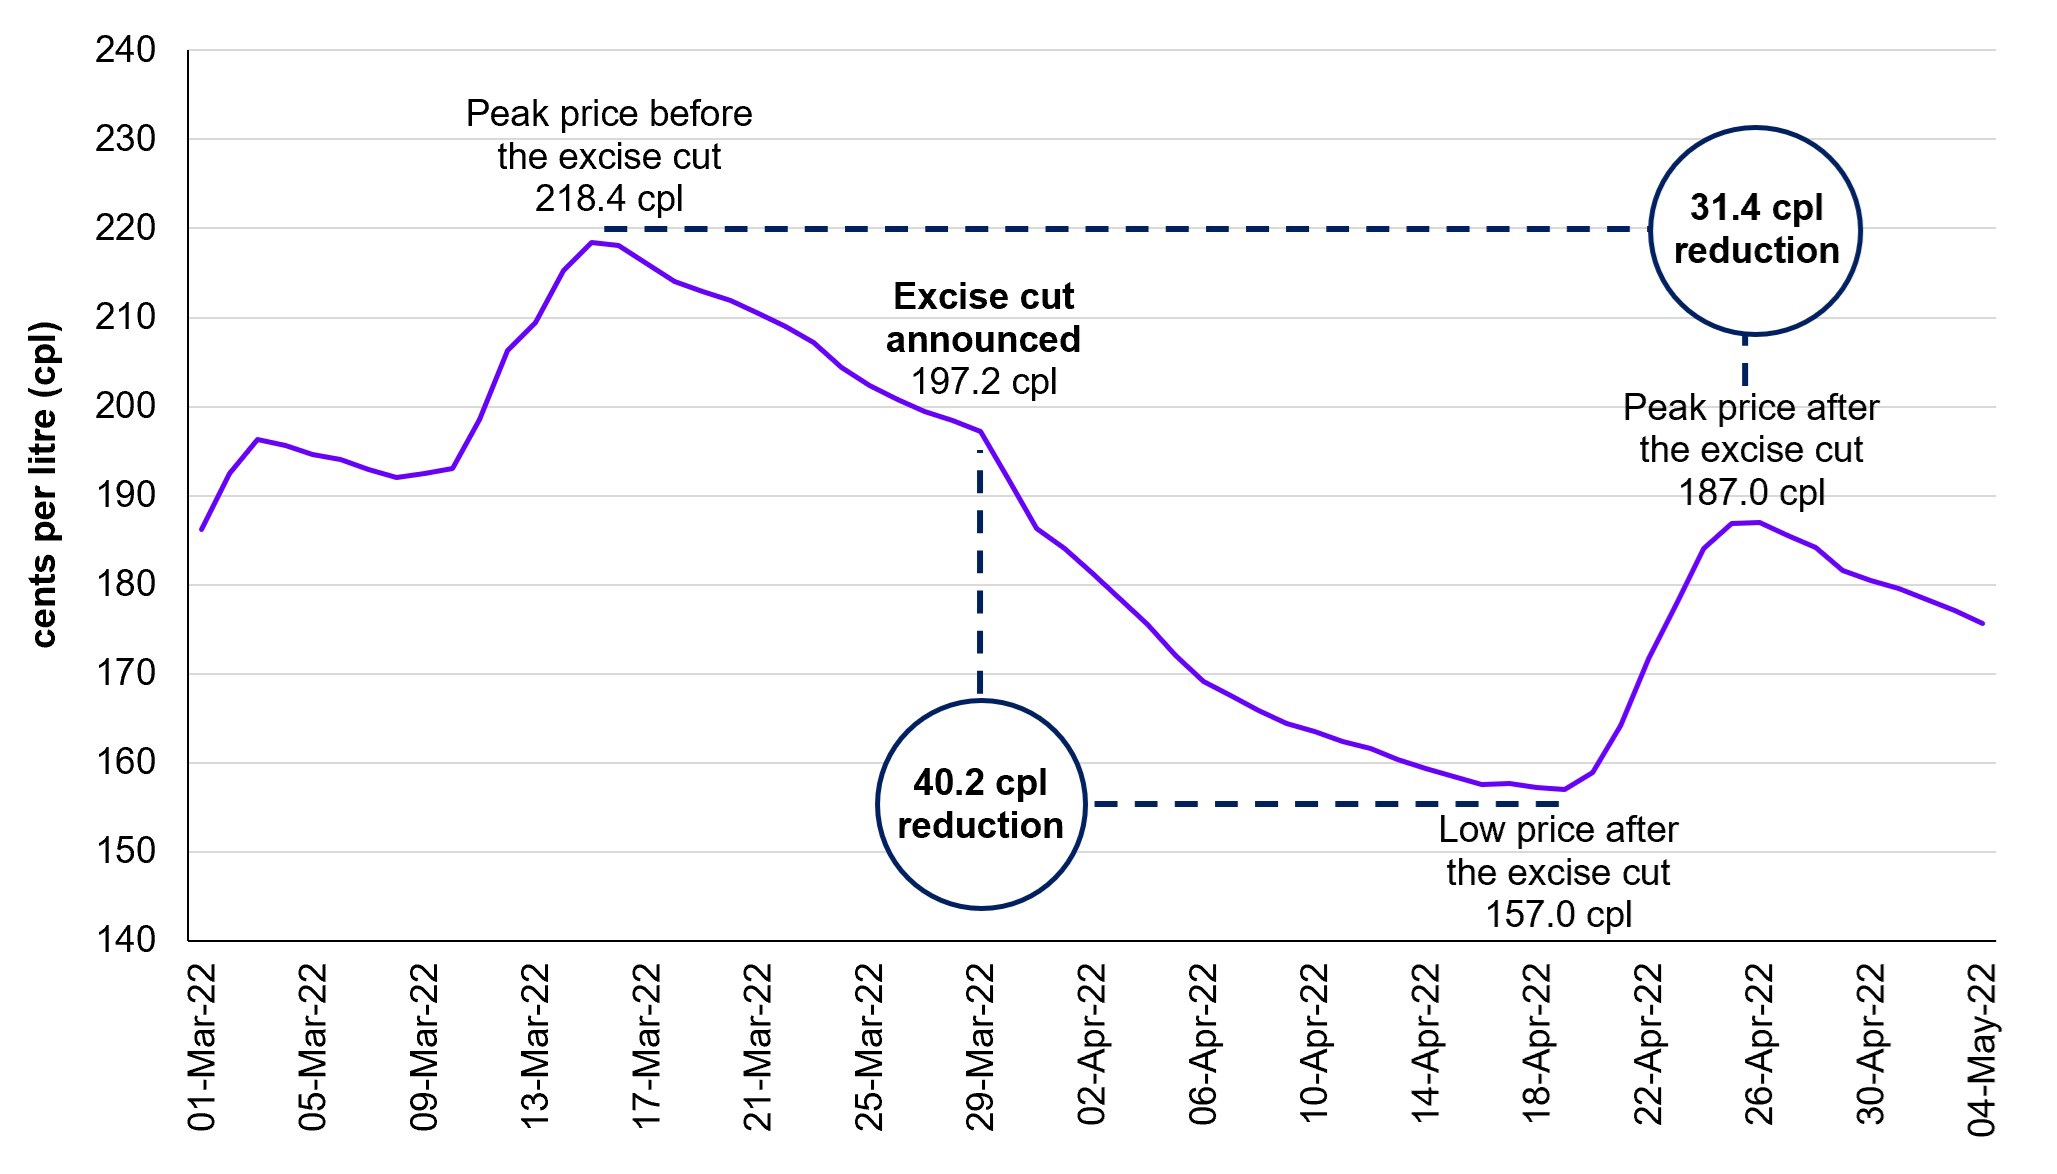 The chart below shows daily average regular unleaded petrol prices in Melbourne from 1 March to 4 May 2022.